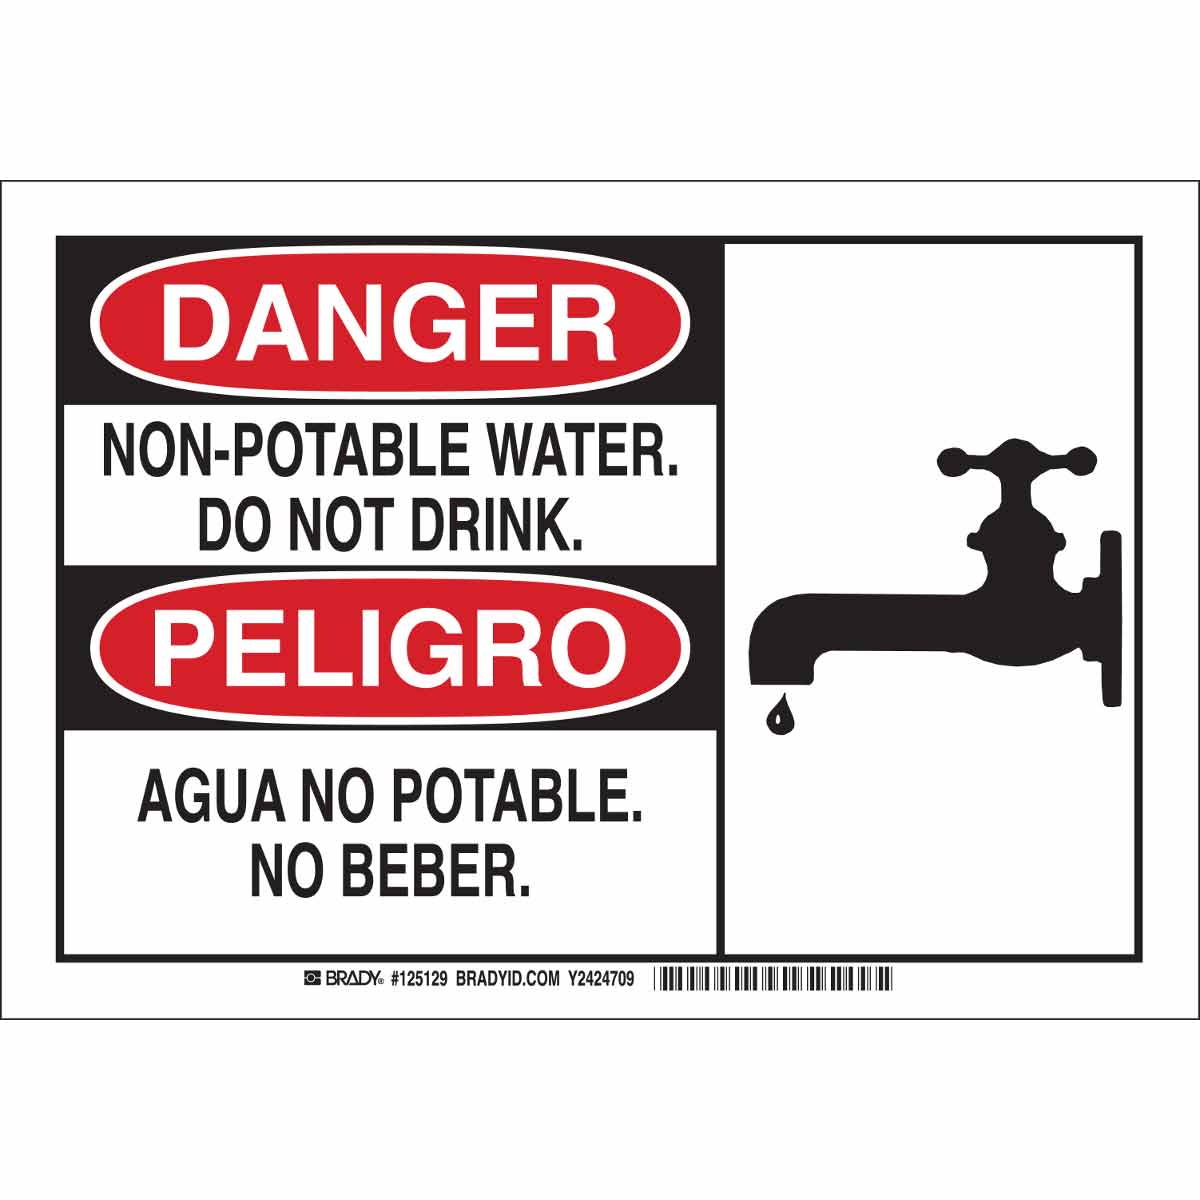 7 Height 10 Width 7 Height Black and Red on White LegendNon-Potable Water No Beber Brady 125129 Bilingual Sign Do Not Drink./Agua No Potable LegendNon-Potable Water Do Not Drink./Agua No Potable 10 Width No Beber. 